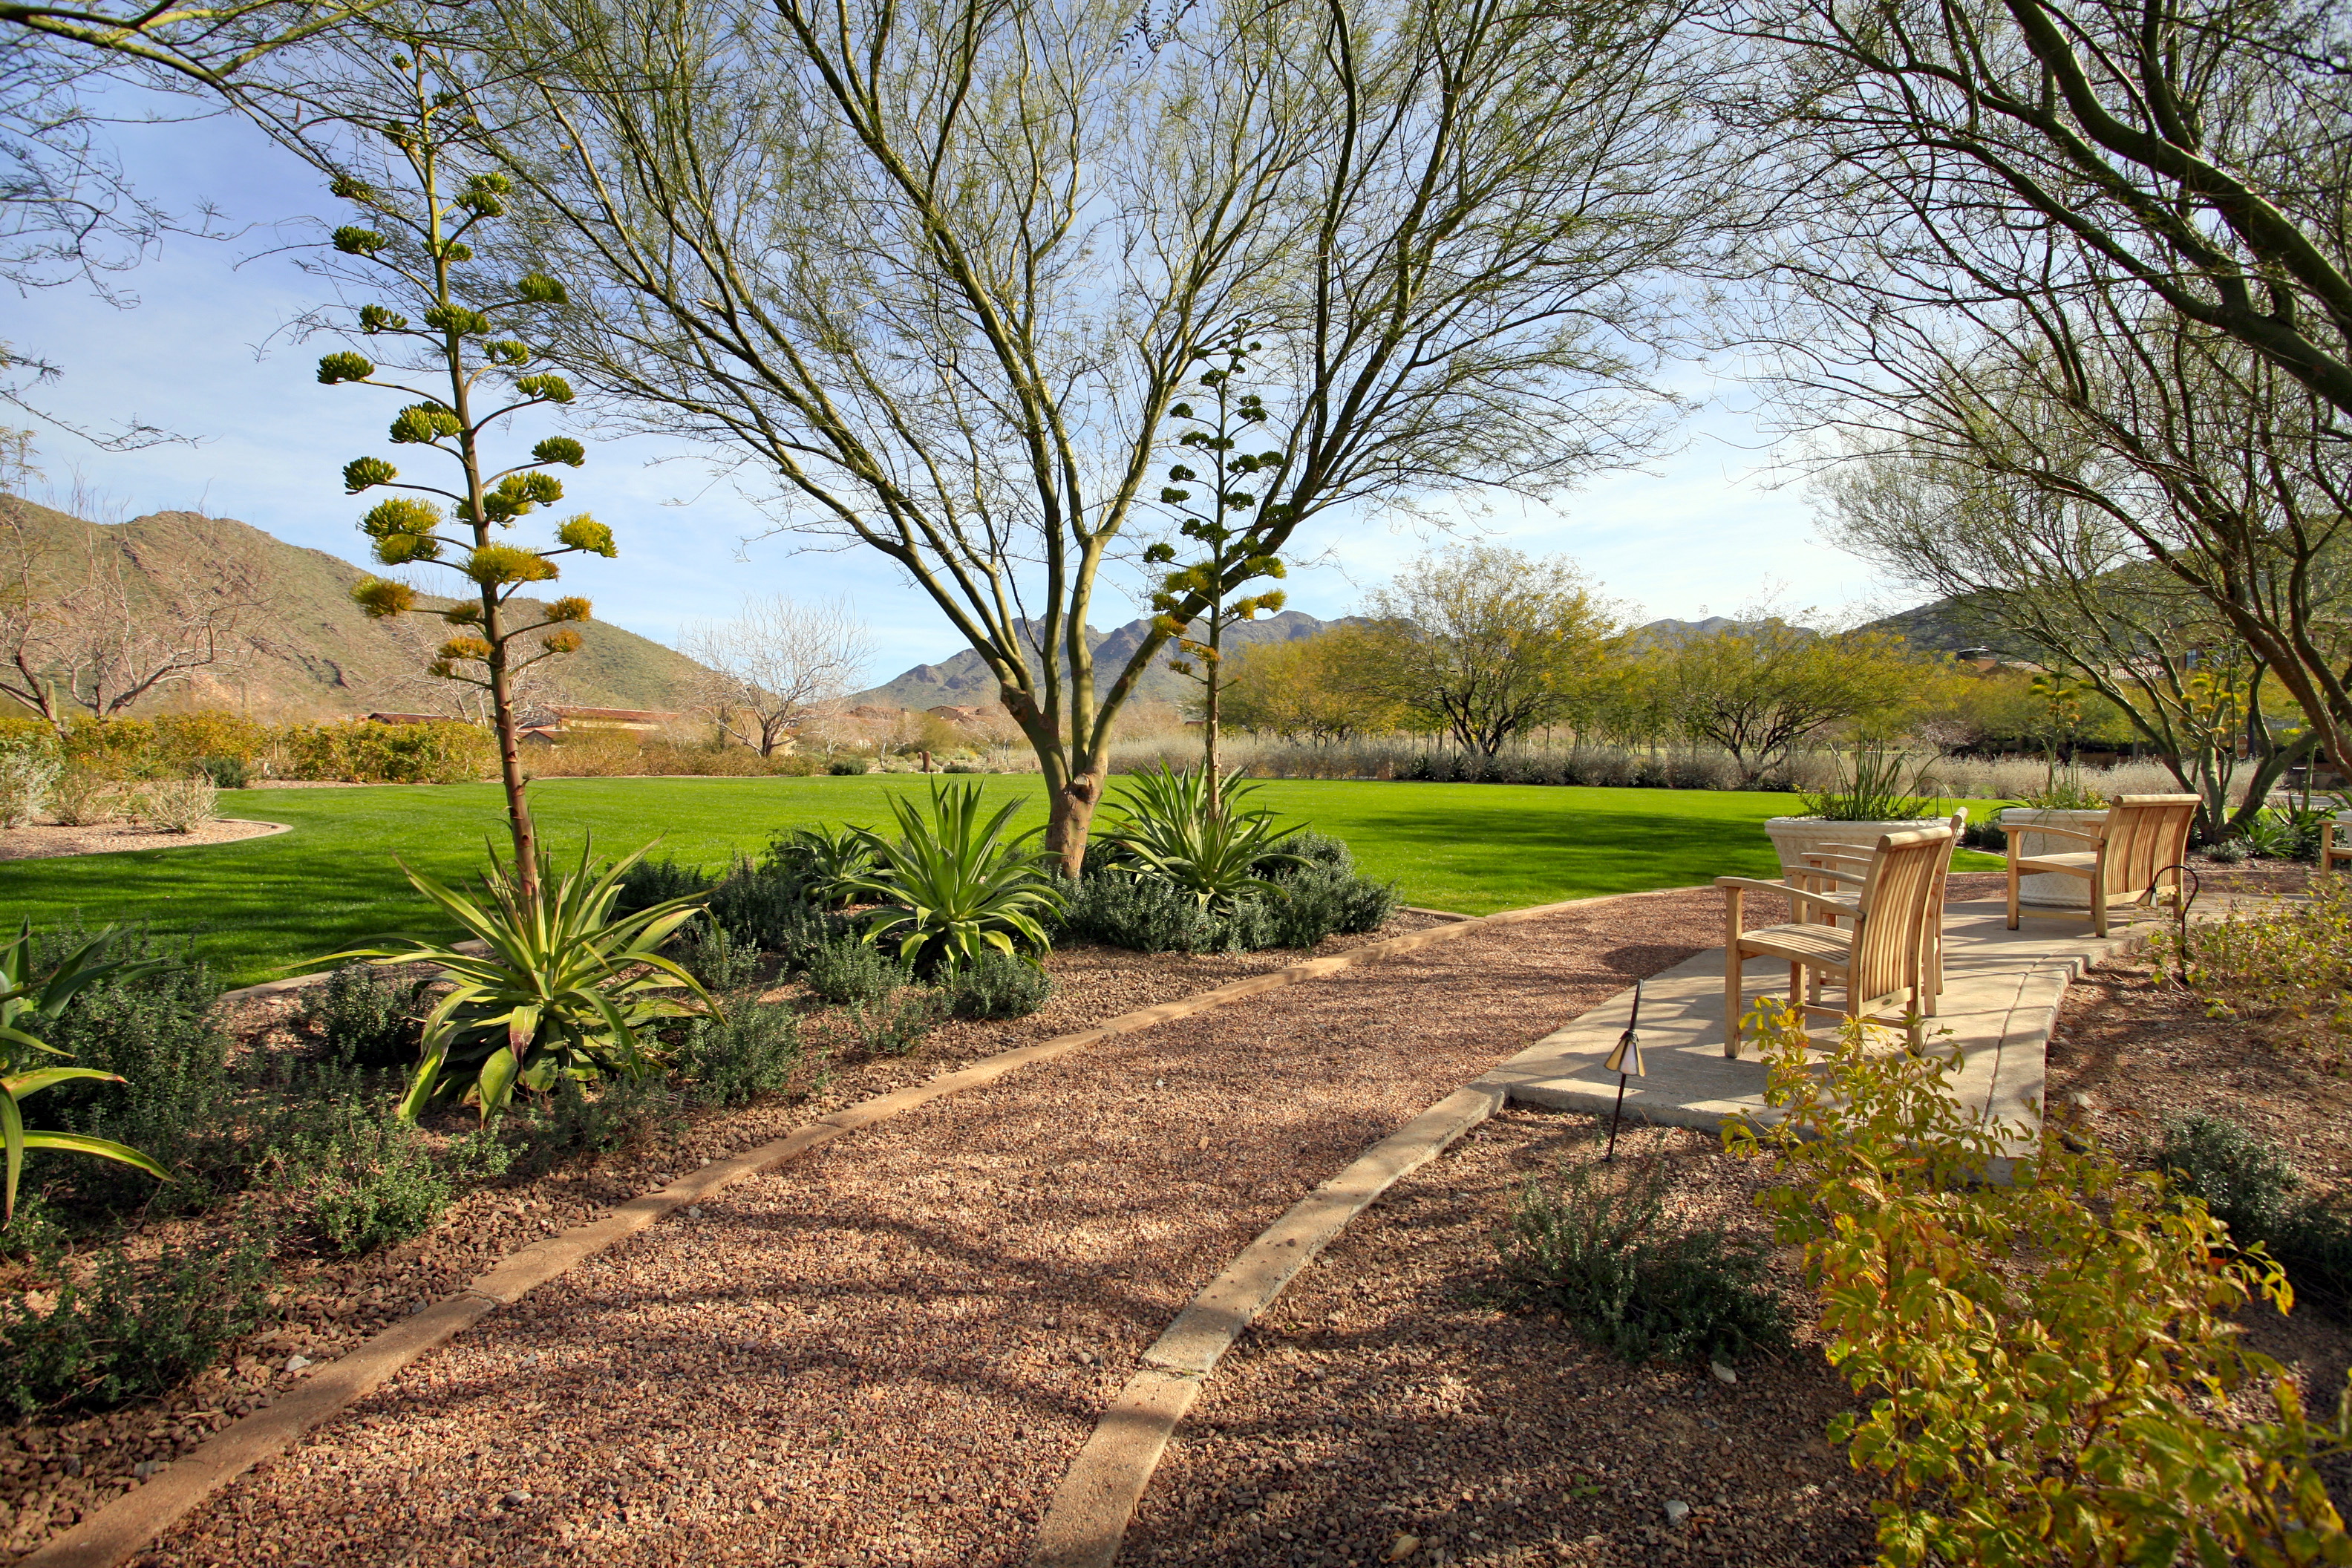 Community-maintained park in Silverleaf.